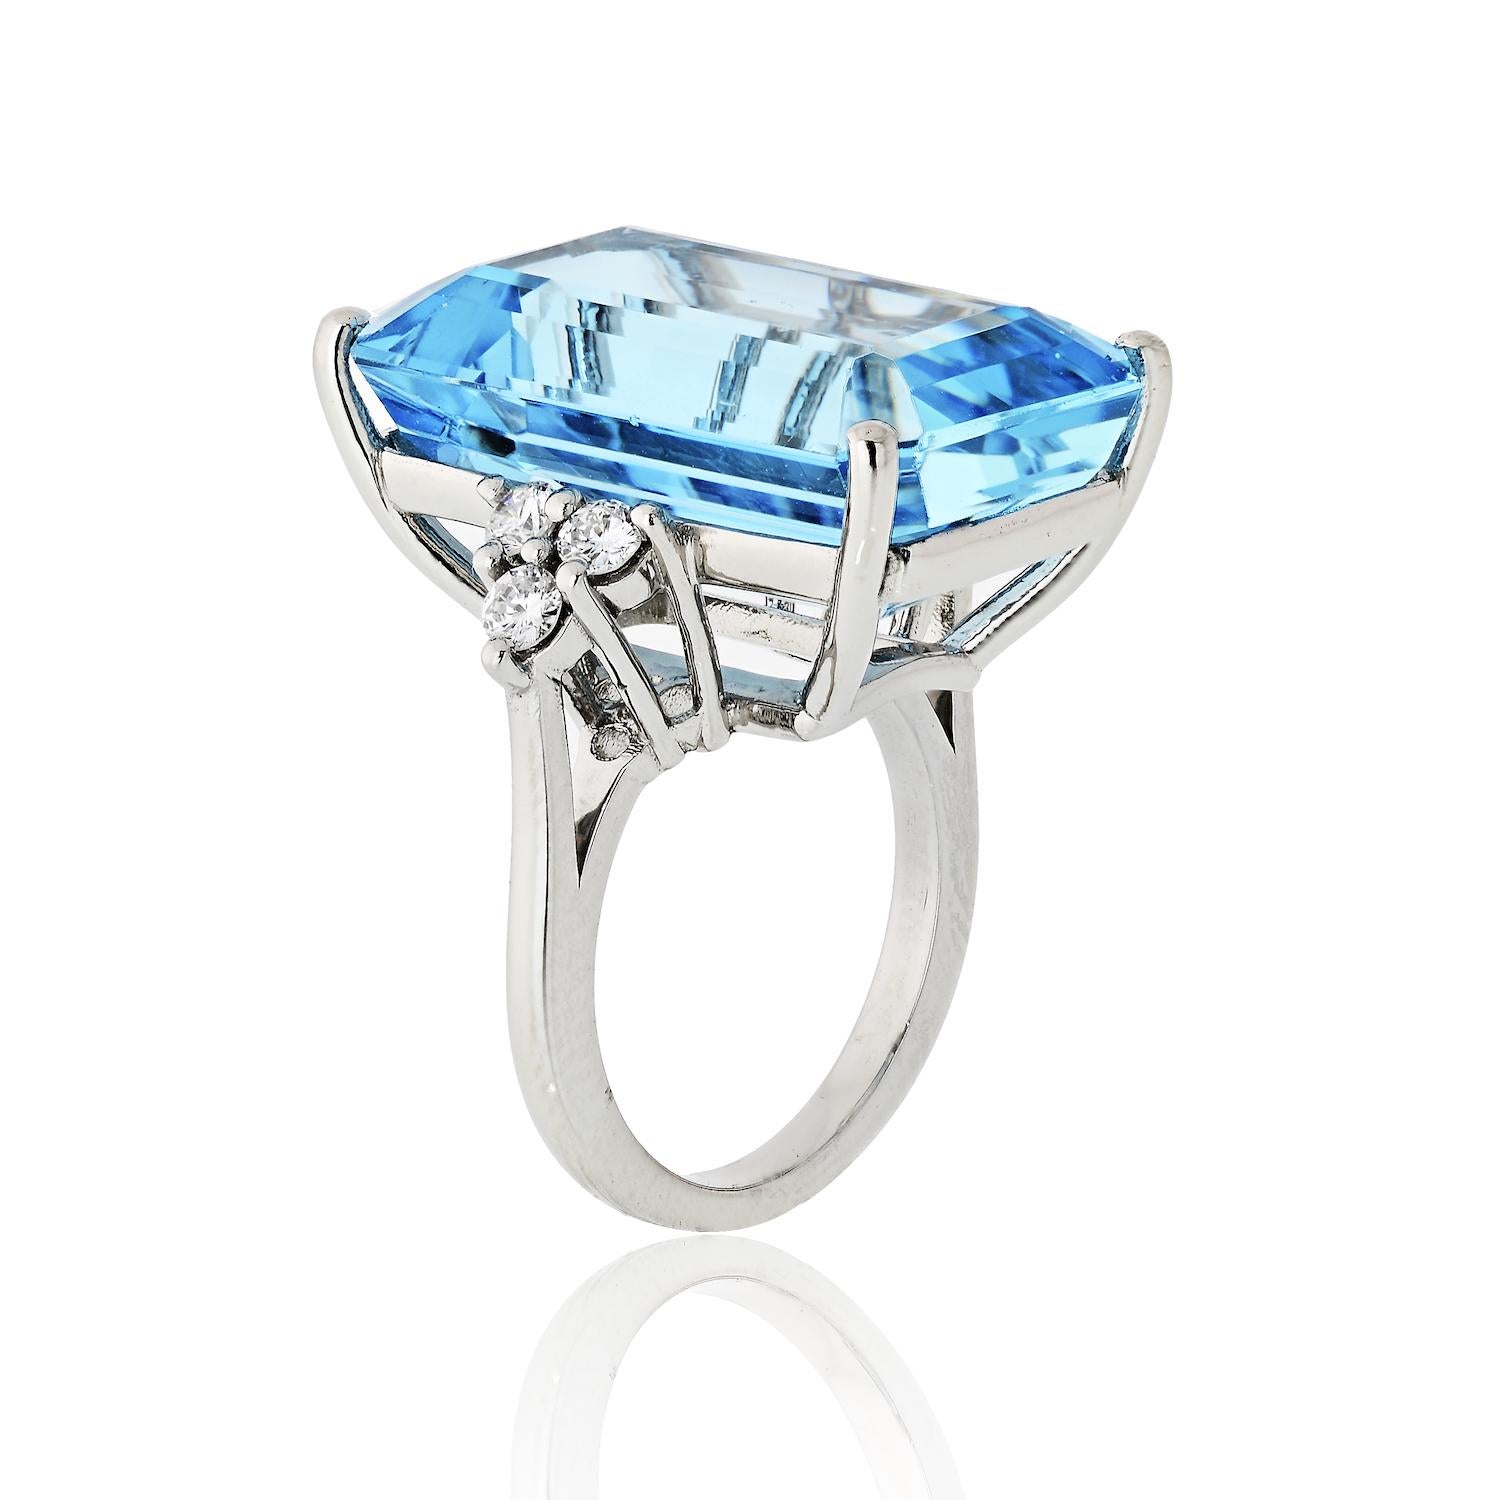 A stunning aquamarine and diamond ring crafted in platinum. Mounted with a 25 carat aquamarine of a medium-light blue color, with three diamonds accenting each side. 
Center stone measures: 23mm long and 15mm wide.
Finger size: 6.5.